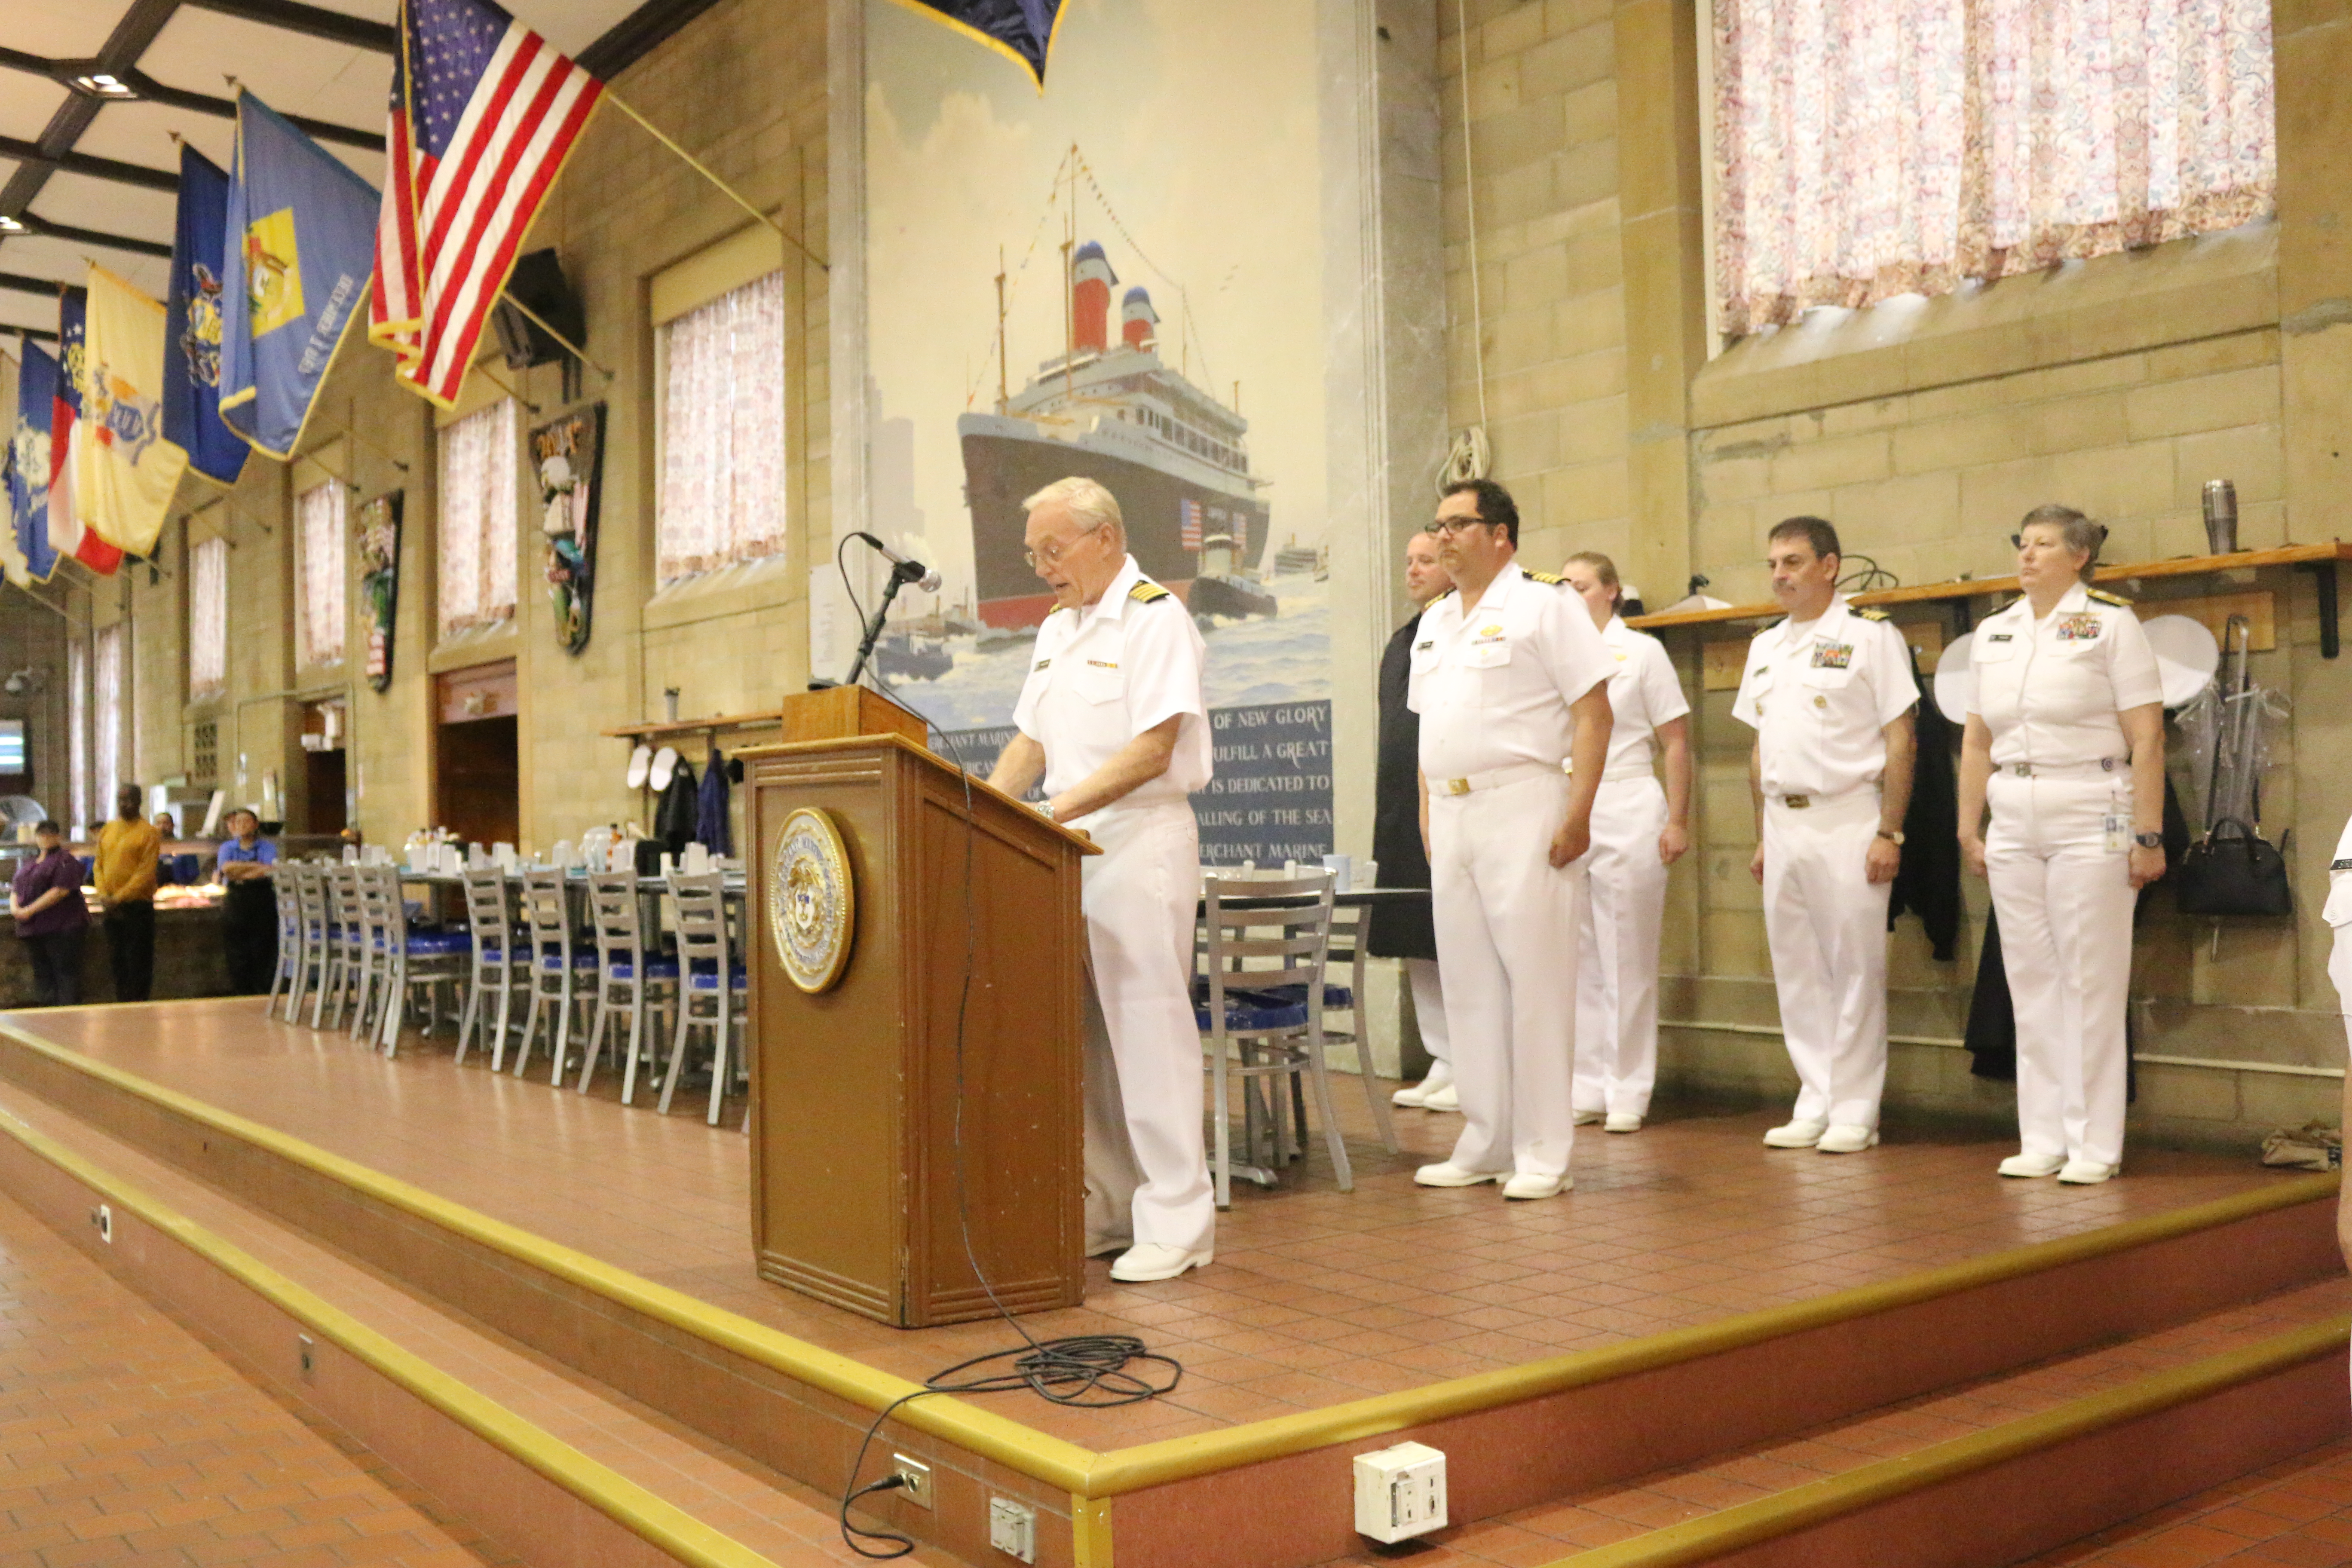 CAPT John Hagedorn honors our Merchant Mariners - reads Presidential Proclamation